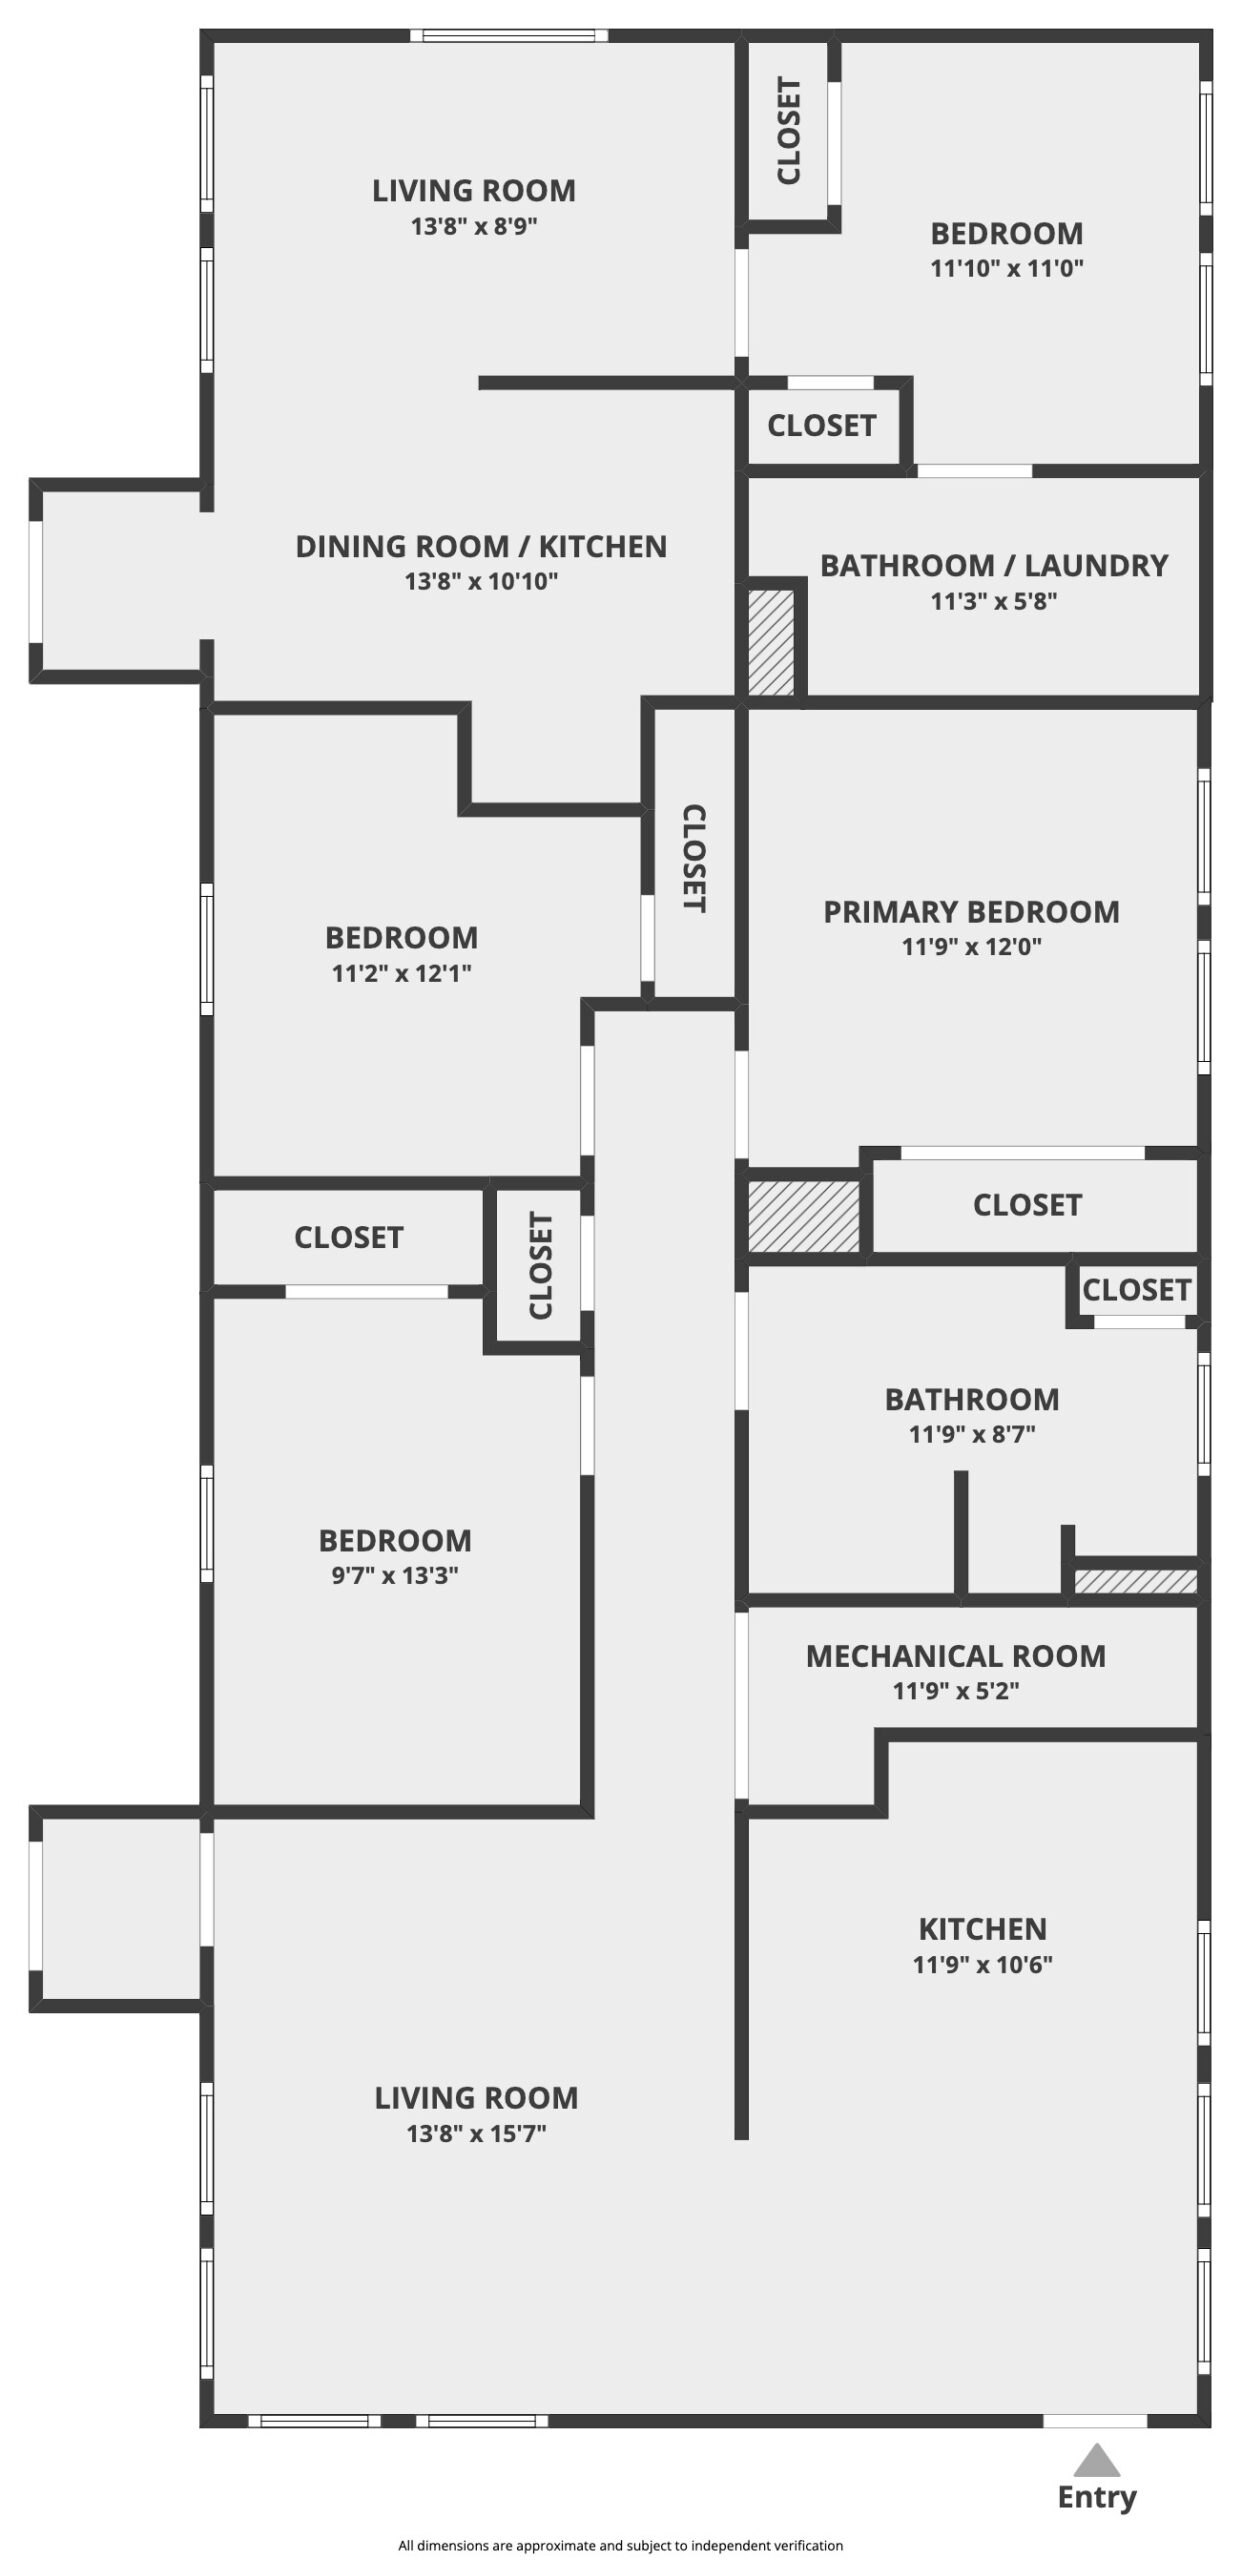 Black and white property schematic floor plan. Home layout and dimensions are displayed on an overhead view.